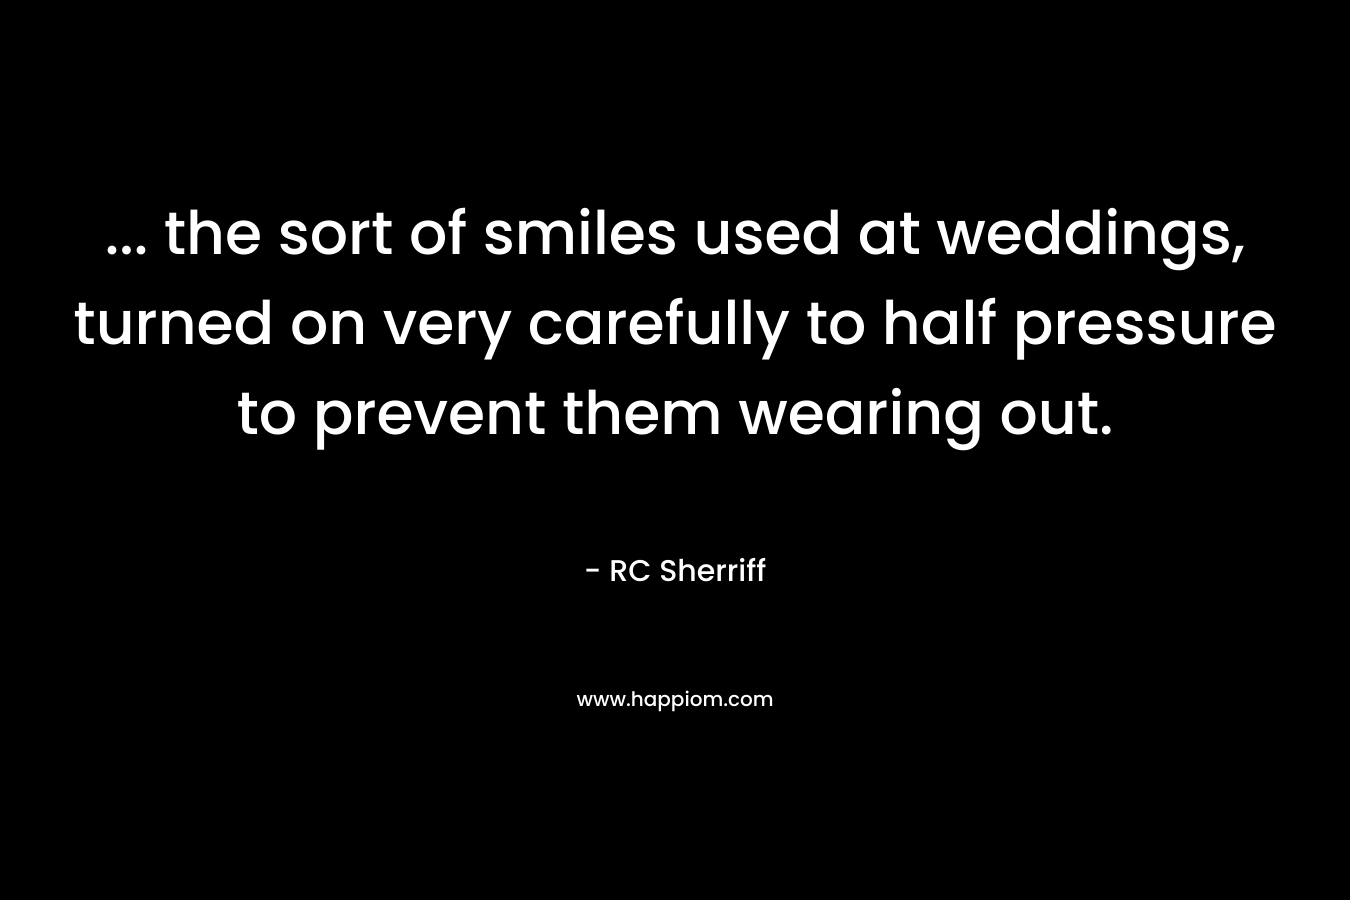 ... the sort of smiles used at weddings, turned on very carefully to half pressure to prevent them wearing out.